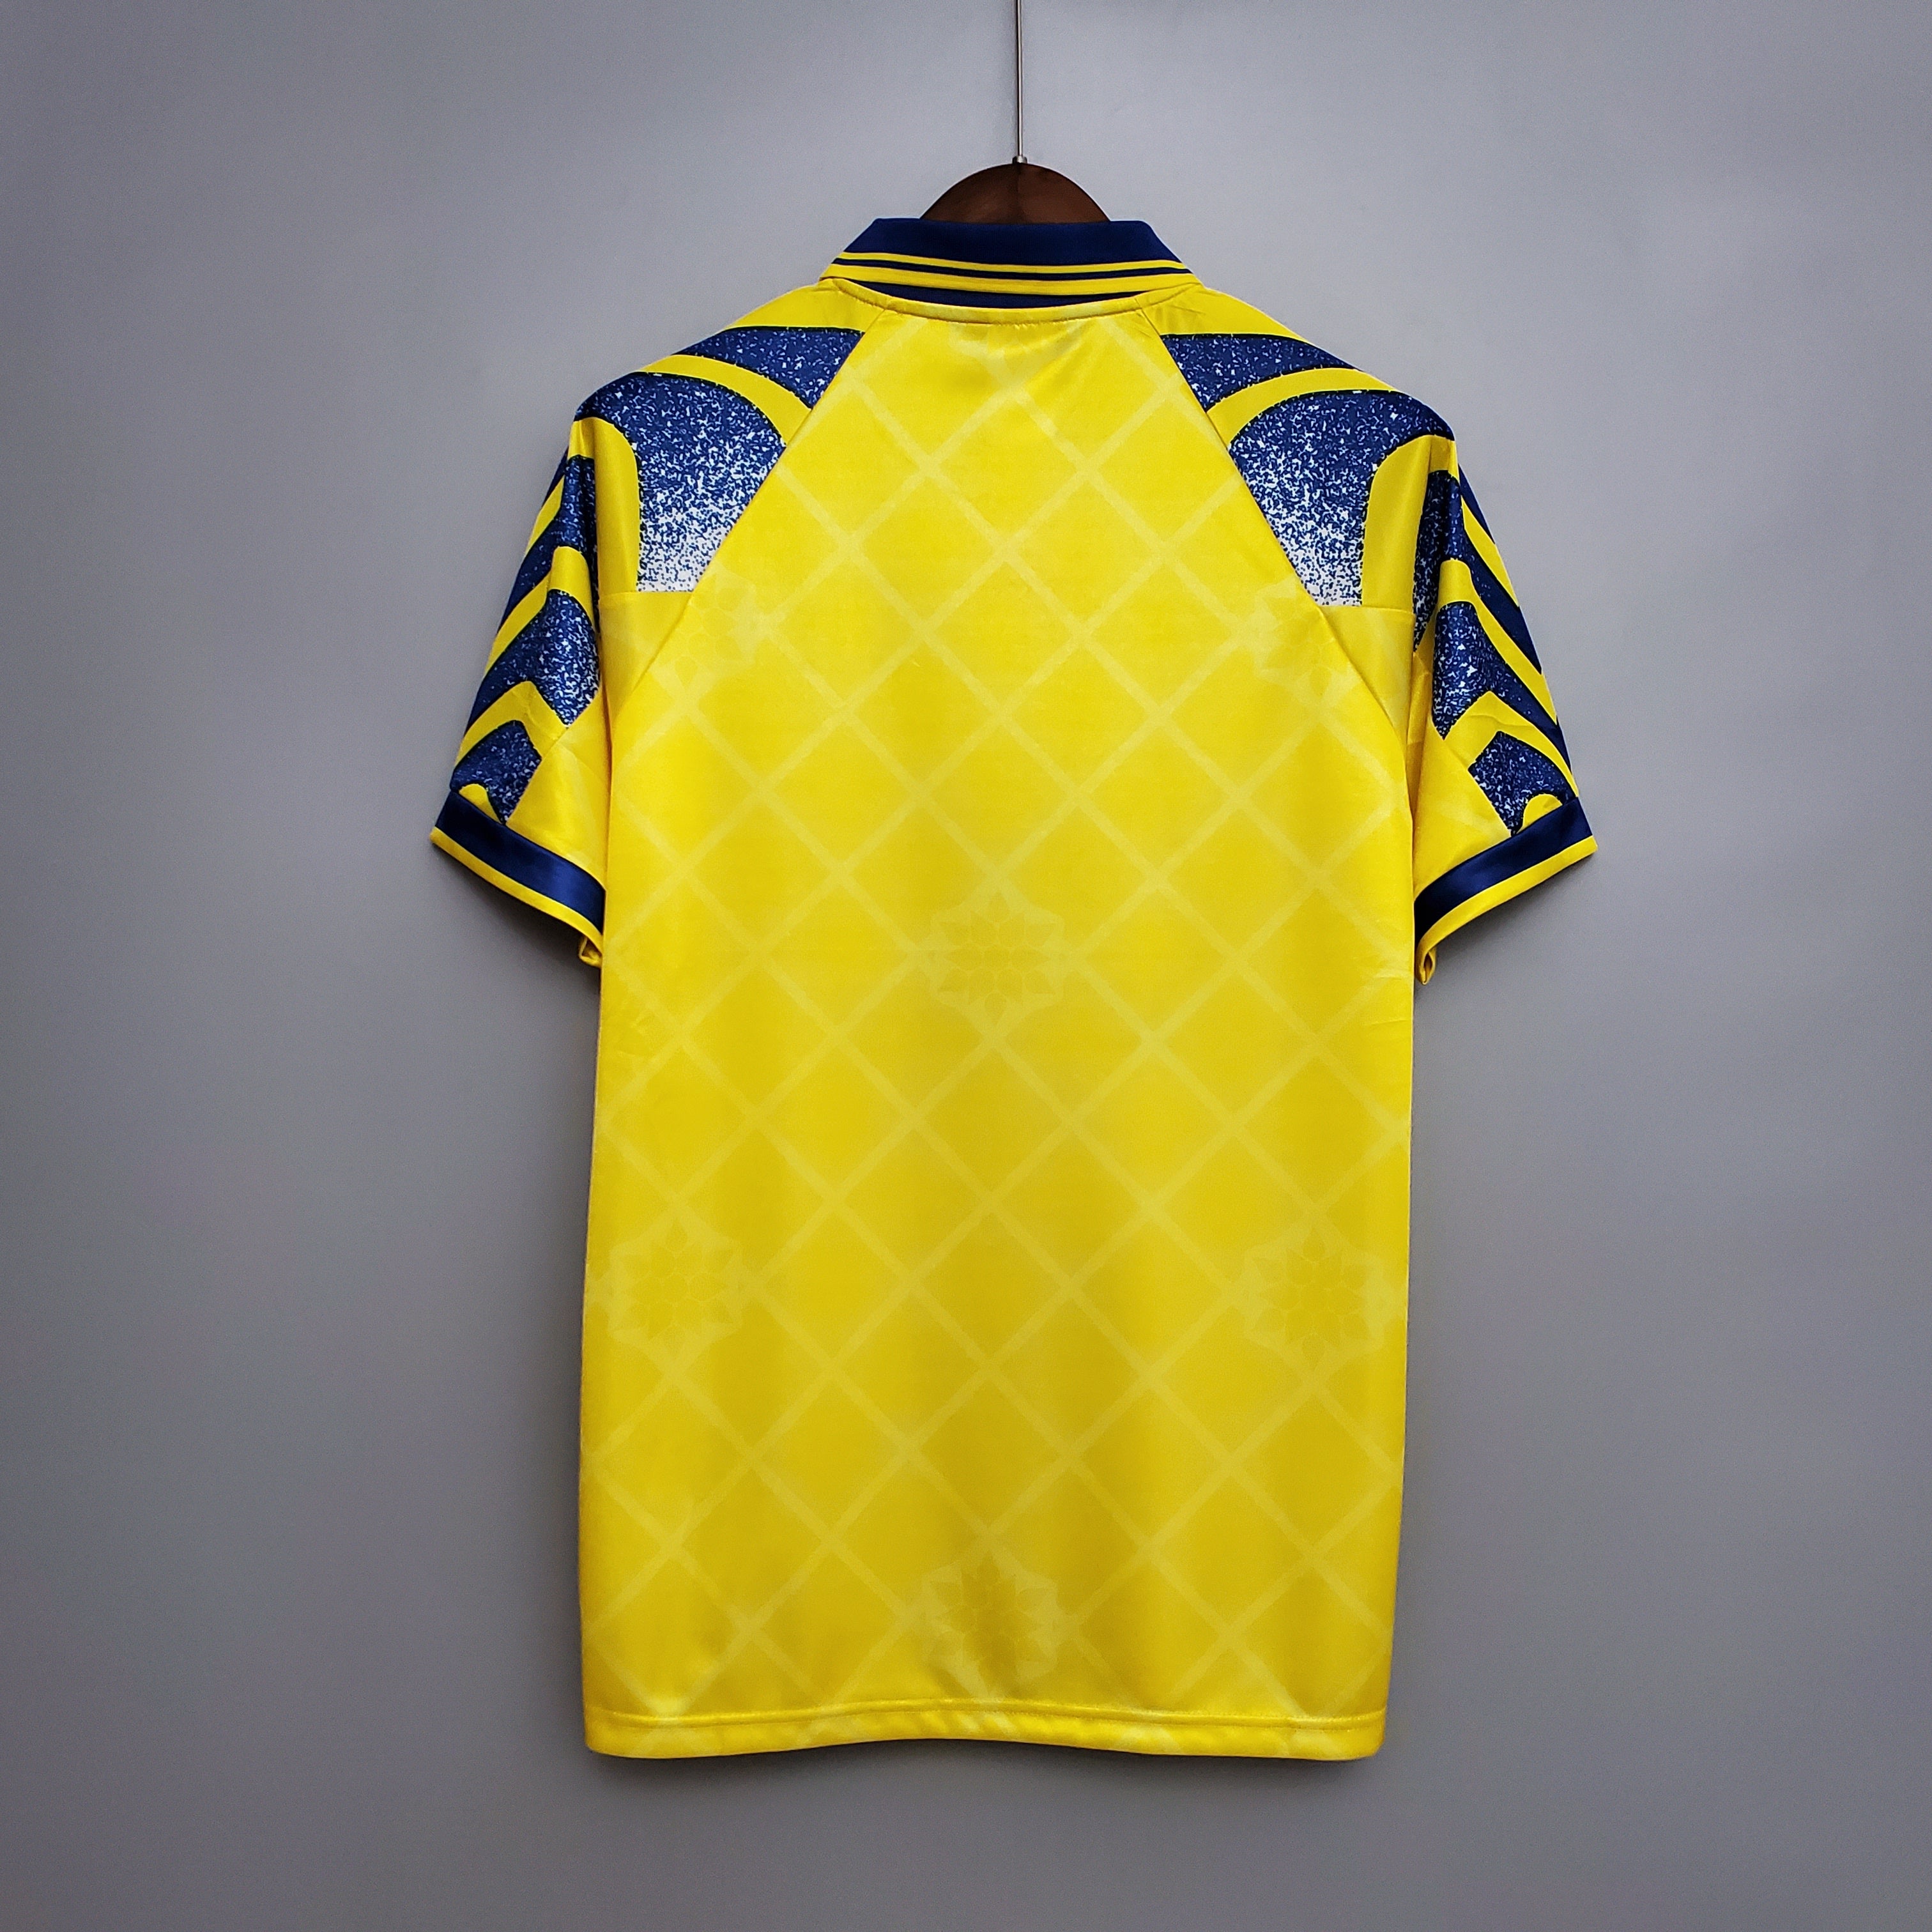 Parma 1995-97 Home Jersey